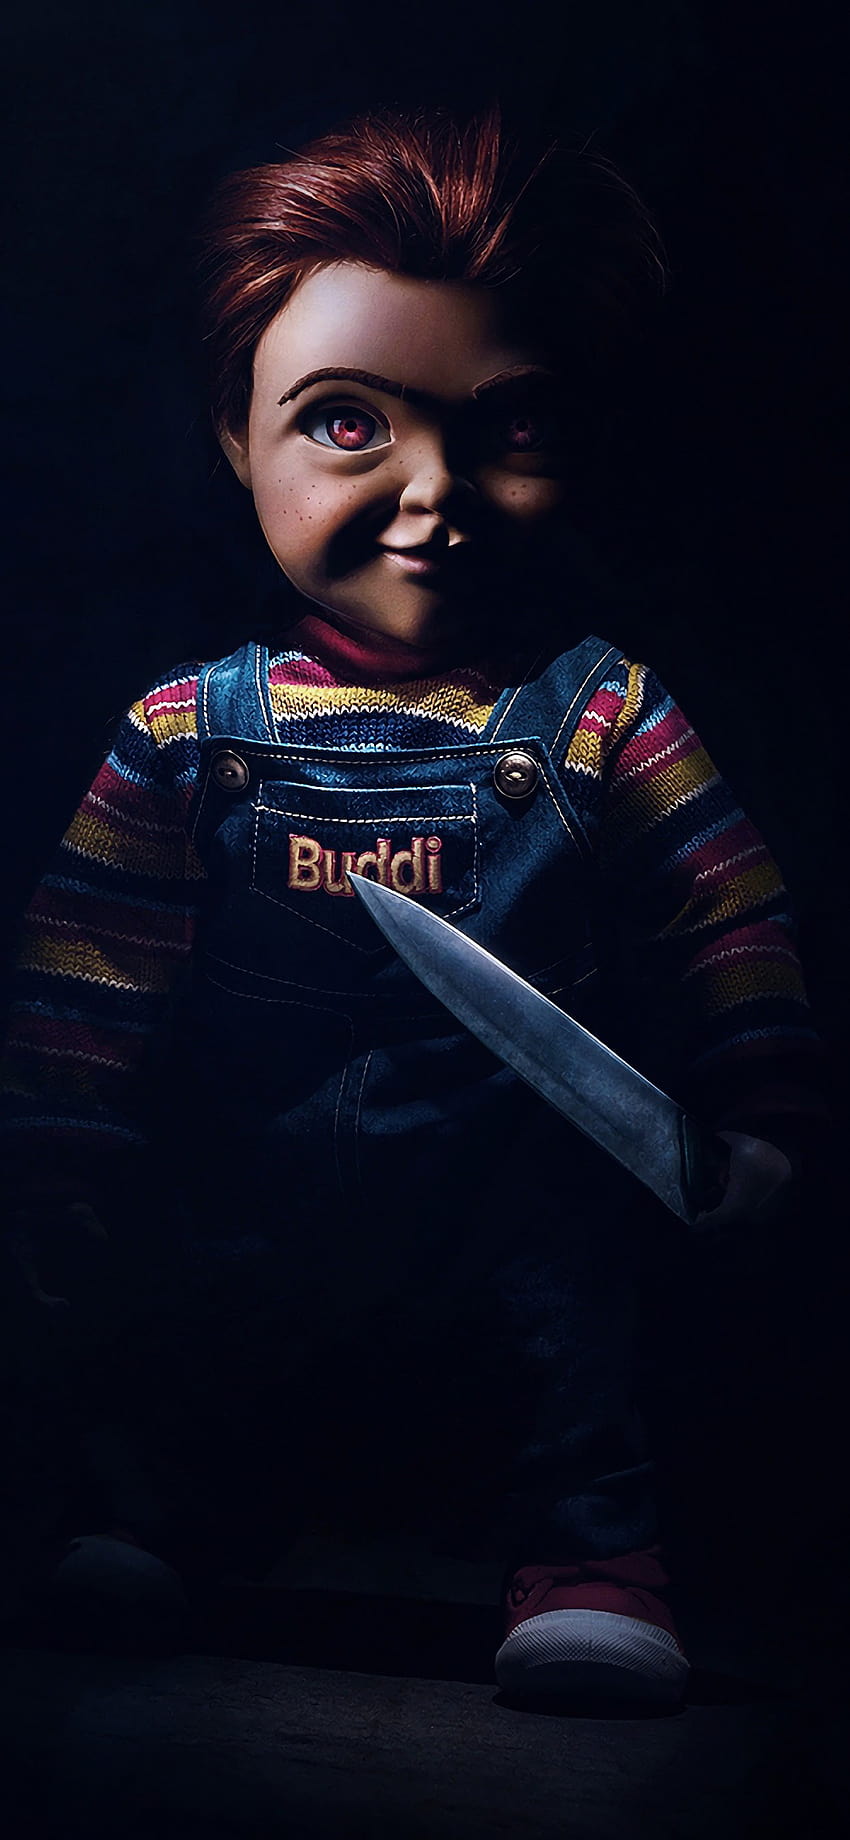 Chucky wallpaper by Anypocket  Download on ZEDGE  9da7